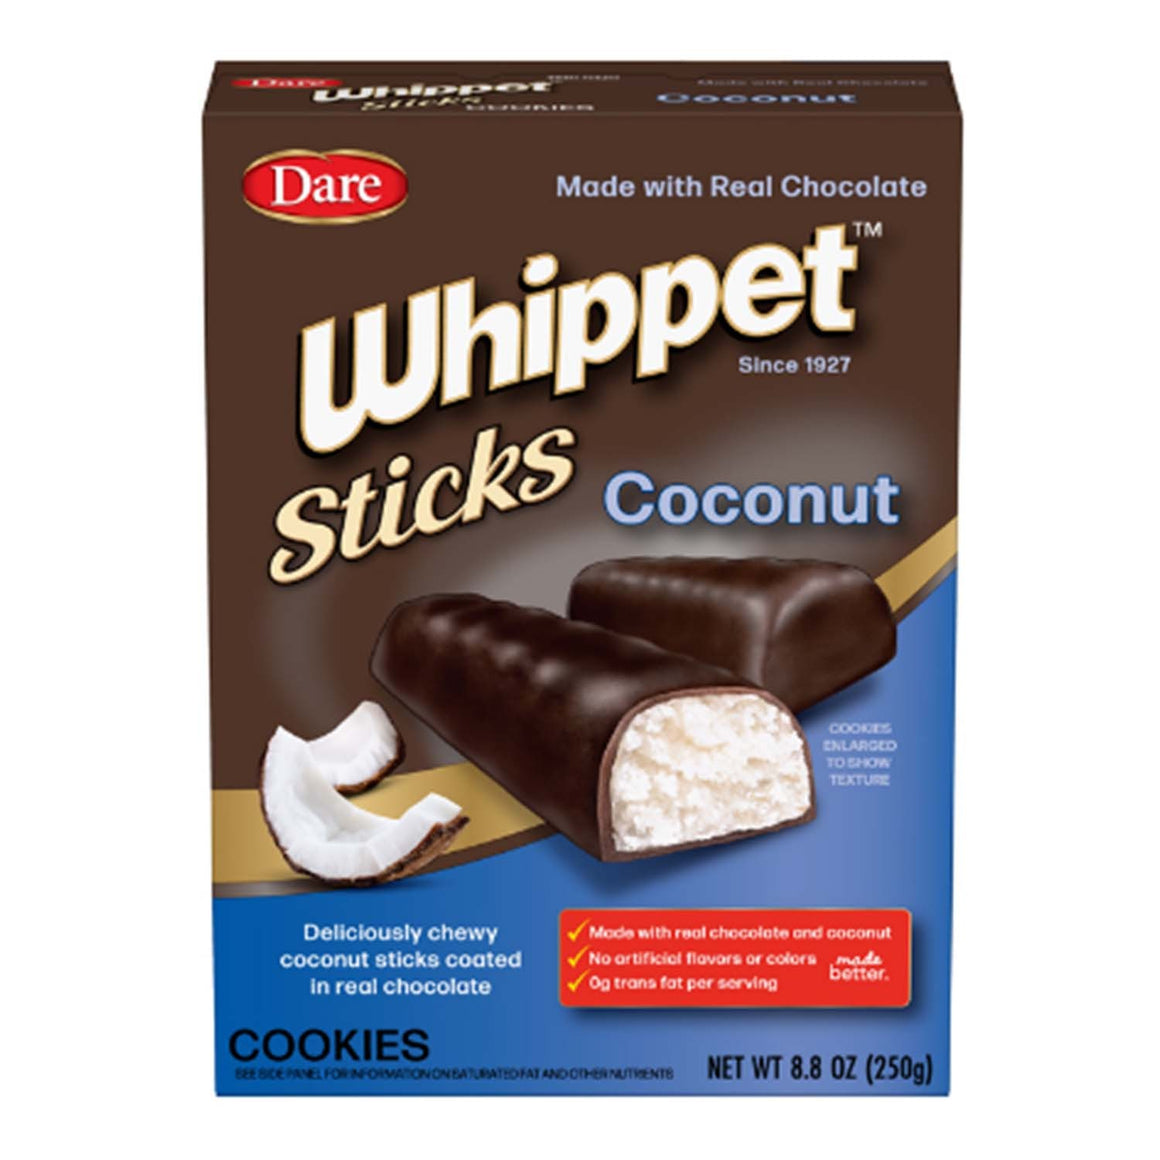 Dare Whippet Sticks Coconut 8.8 oz. Box - For fresh candy and great service, visit www.allcitycandy.com